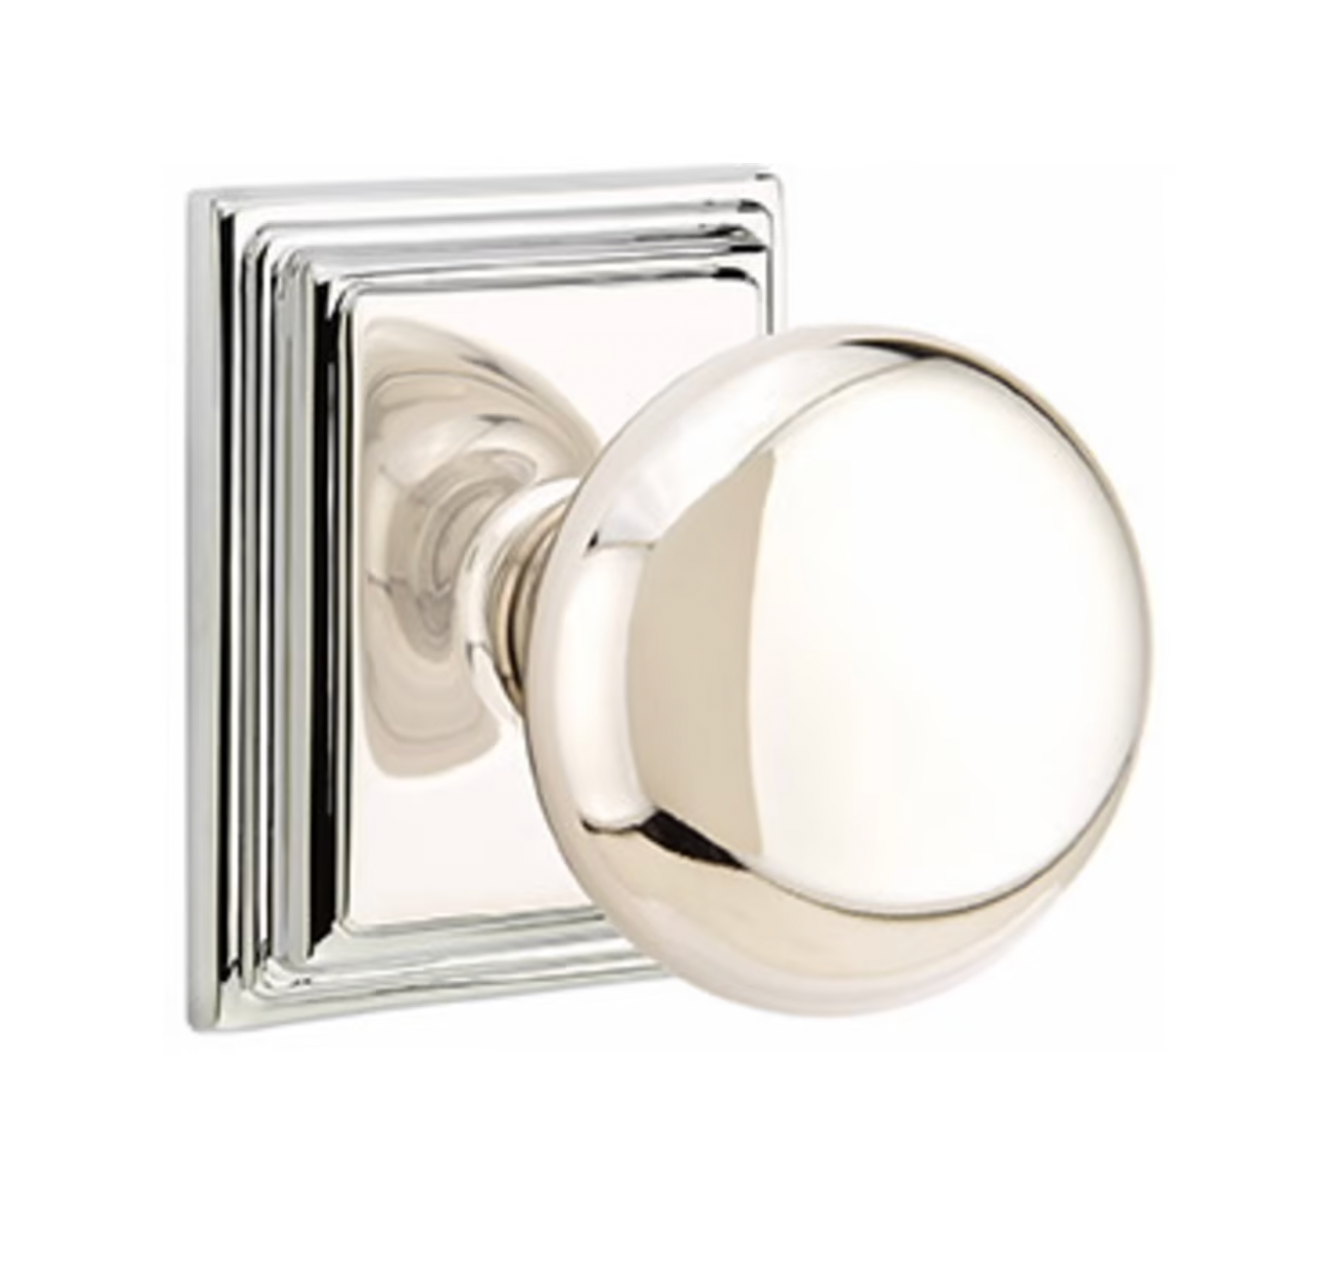 Round Door Knob "Provence" w/ Square Ridge Rosette in Polished Nickel - Industry Hardware